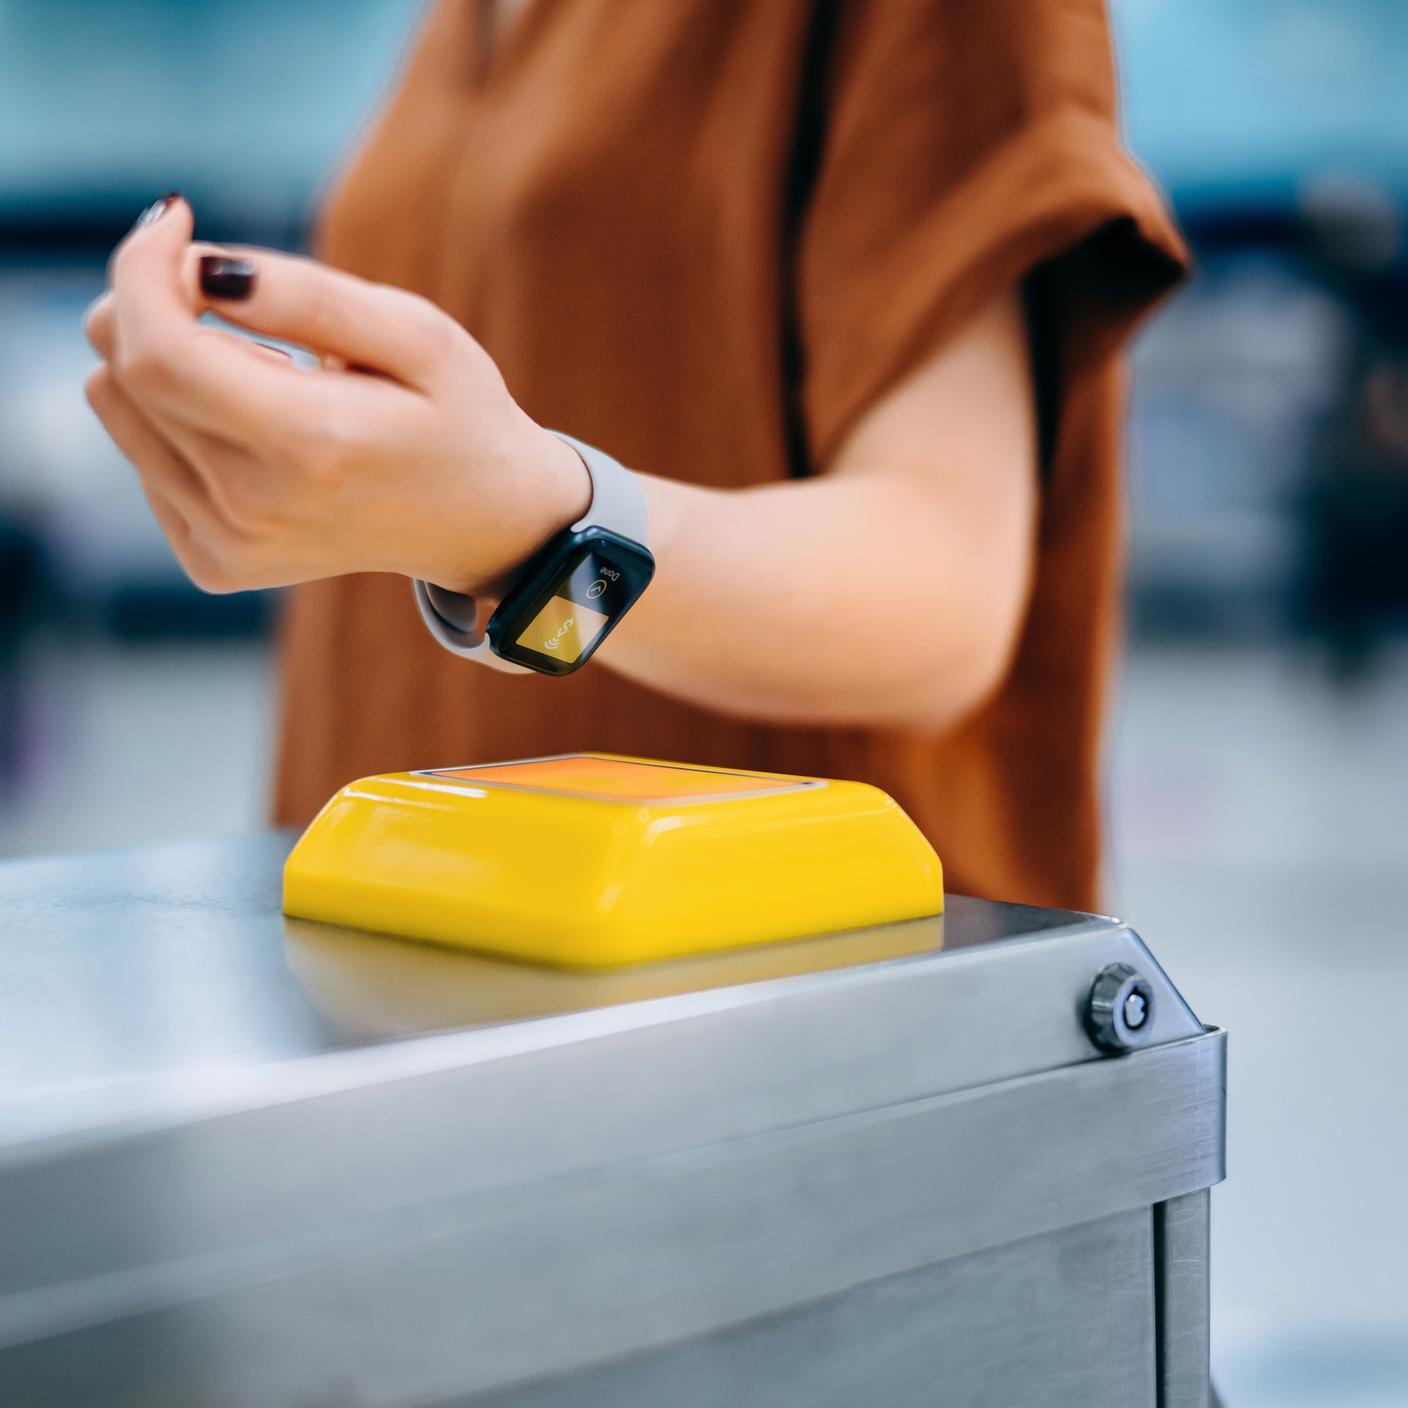 Consumers paying at transport gate with smart watch 